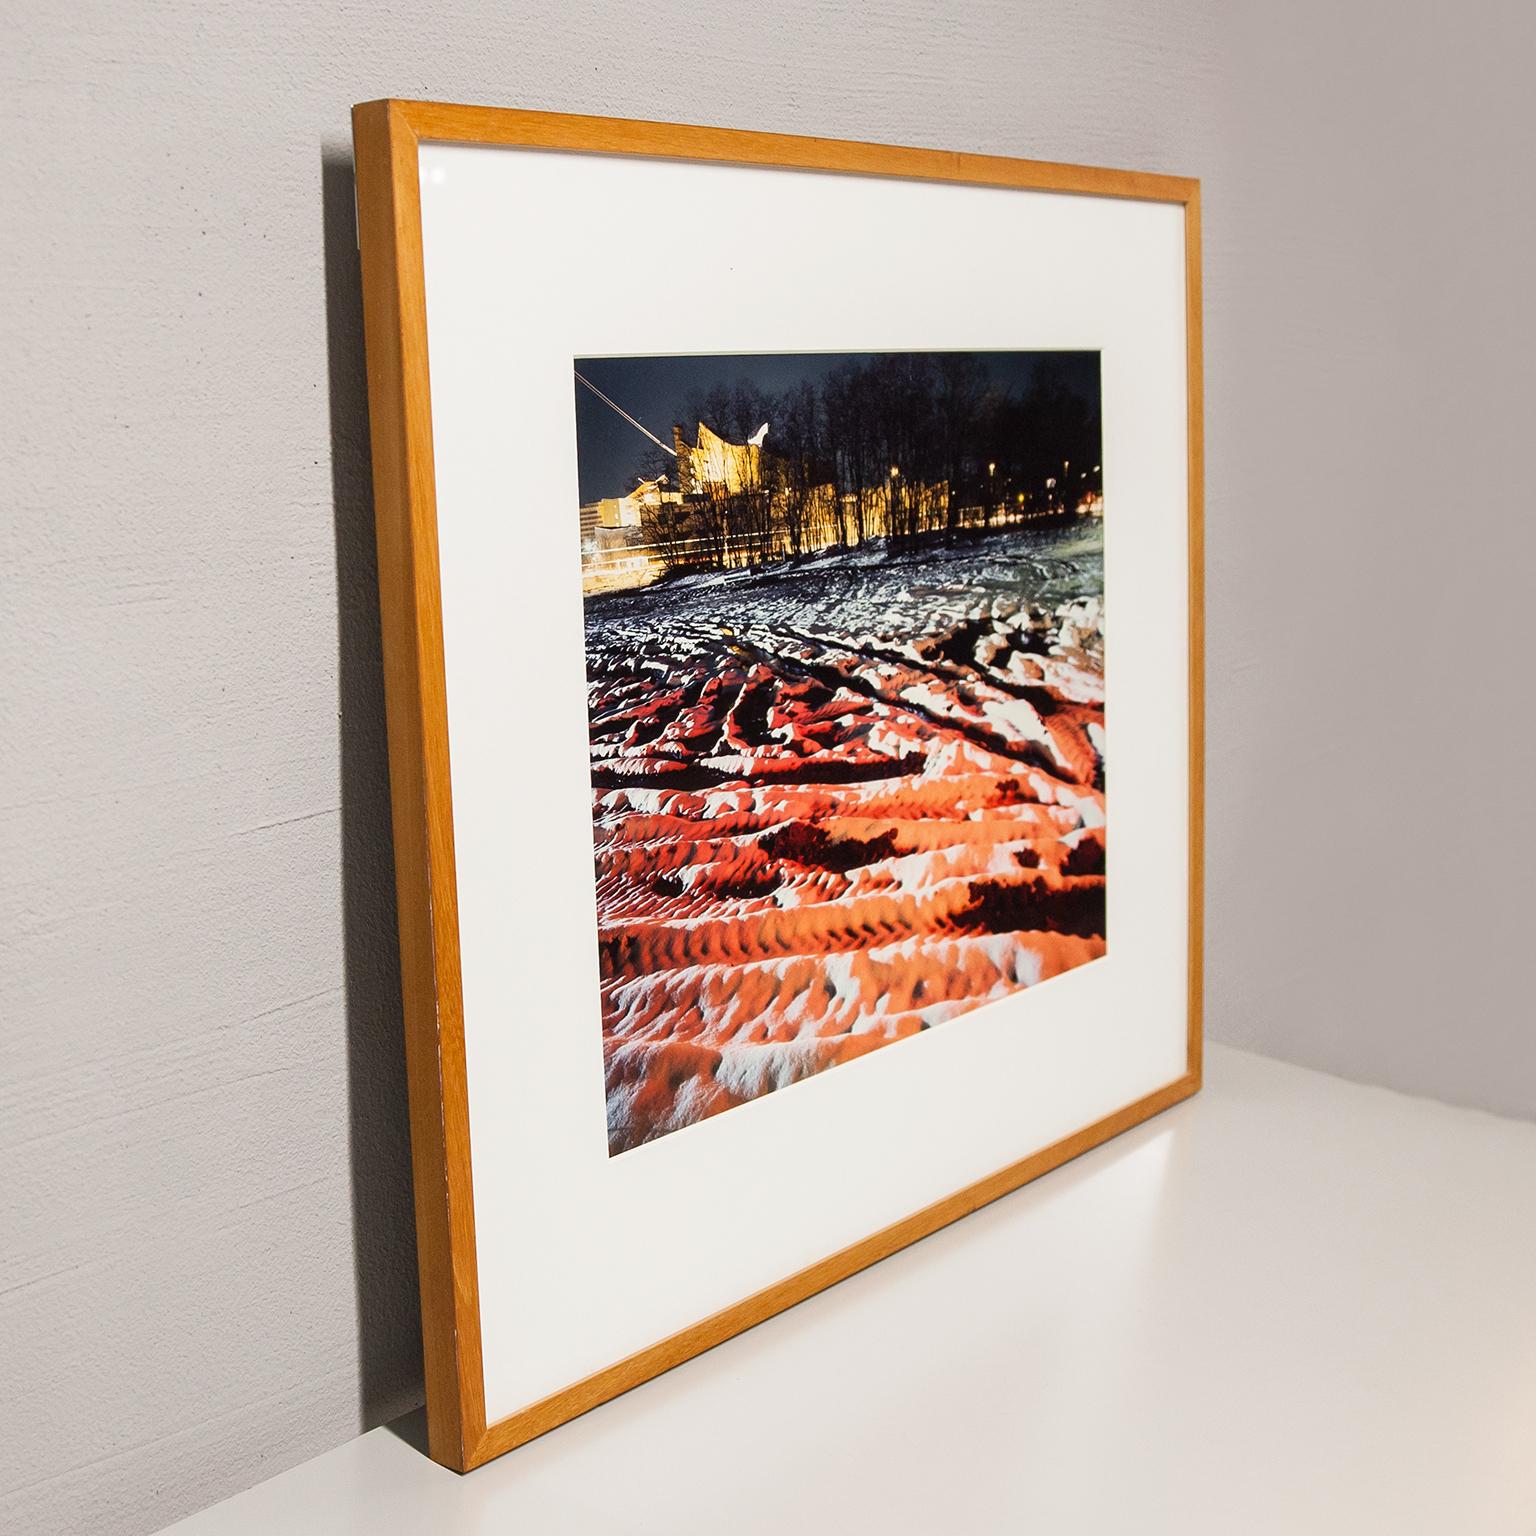 The project includes 51 images. The original works were printed on Ilfochrome. Verso on the backing board signed, inscribed and dated. (19)94 and 95 respectively. Ilfochrome
Photo 48 x 60 cm edition of 8
Frame 75 H x 88 W x 3 D cm

In 1993, Martin